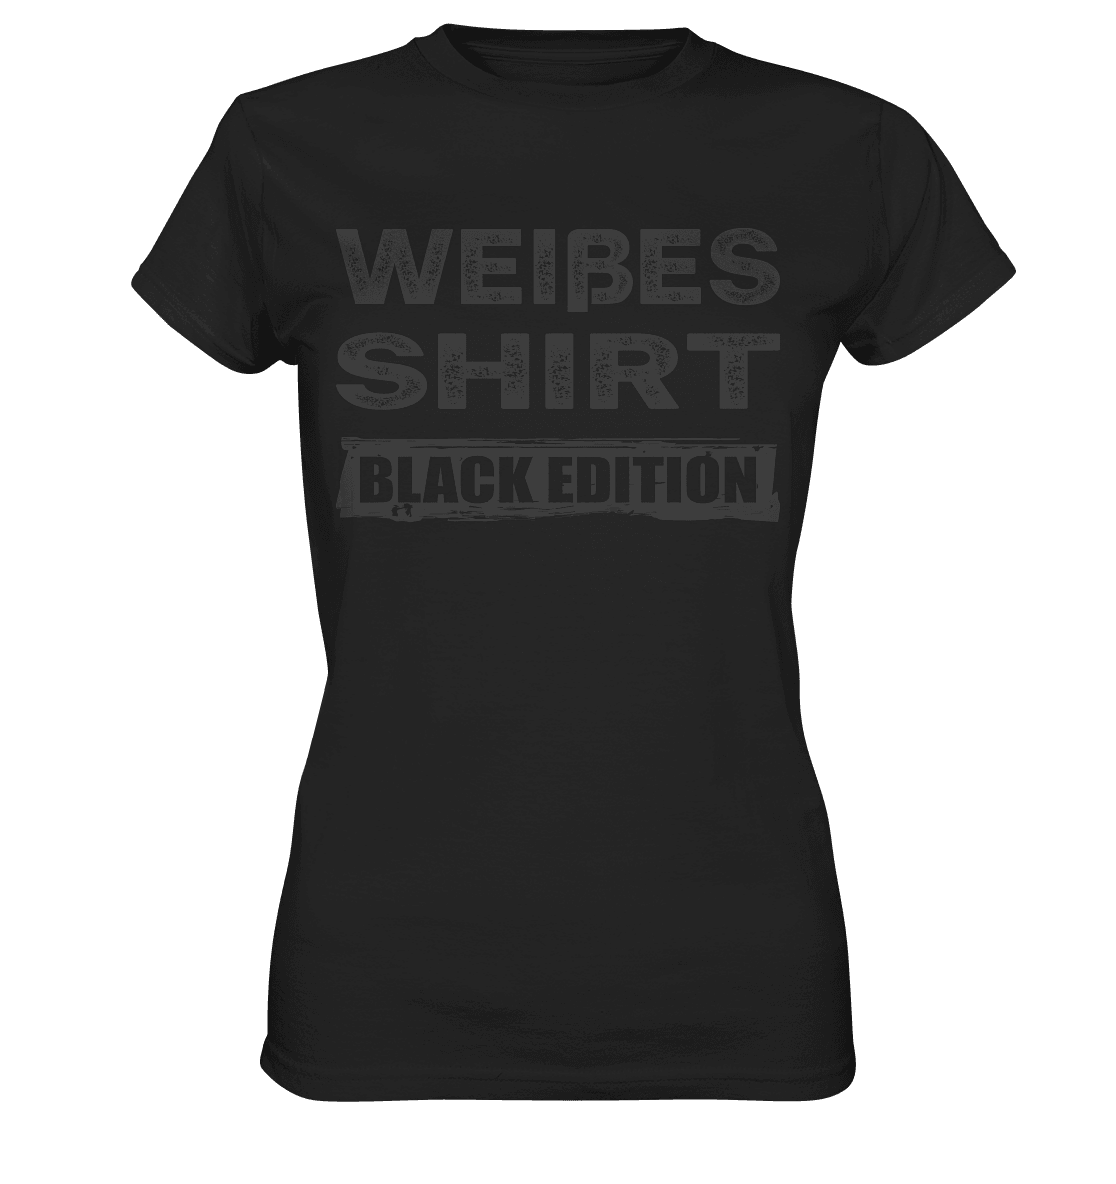 Weißes Shirt - Black Edition - Ladies Shirt - Totally Wasted